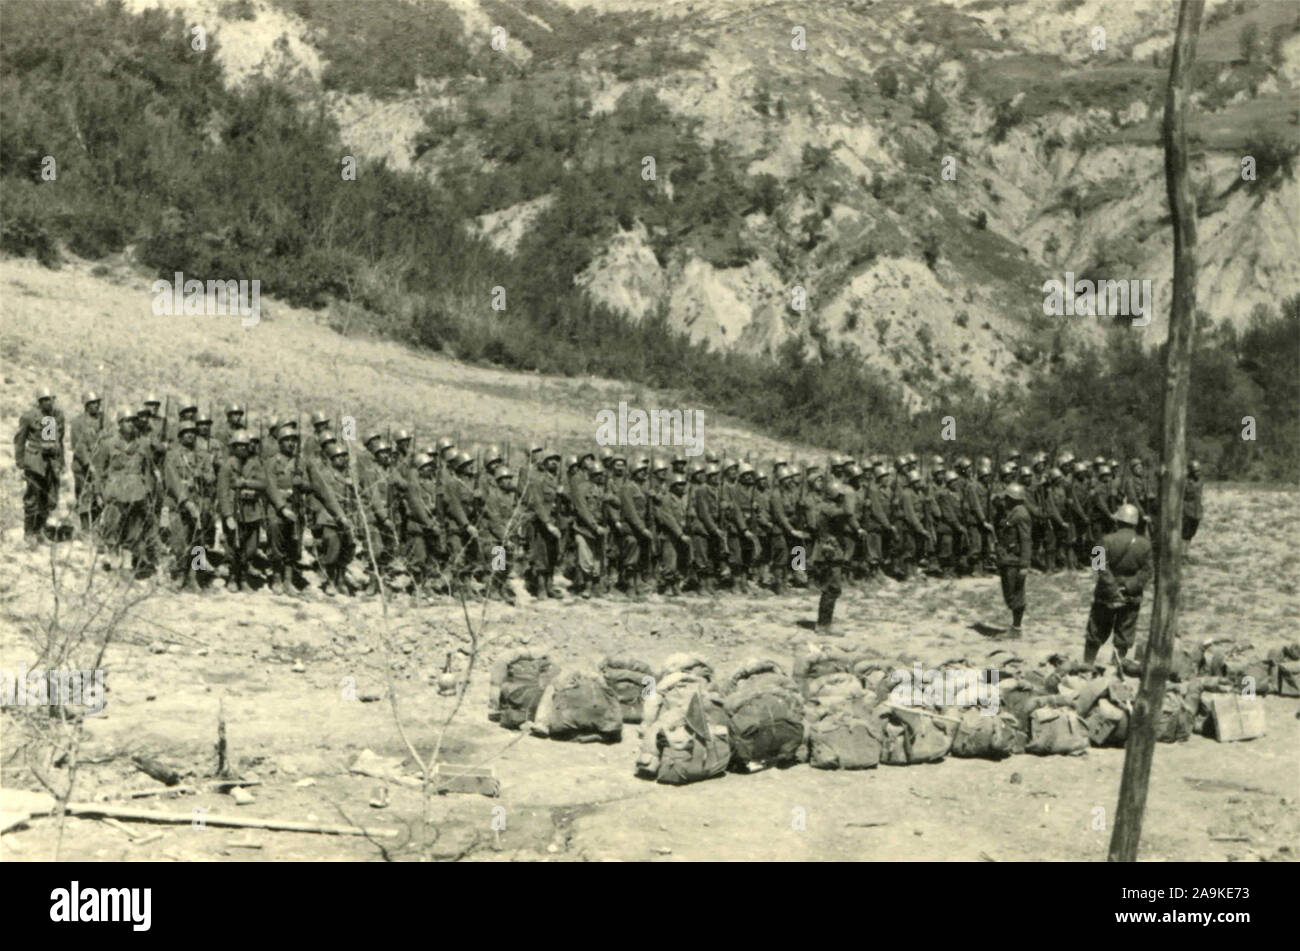 Italian Army Troops During The Albanian Campaign To Recapture